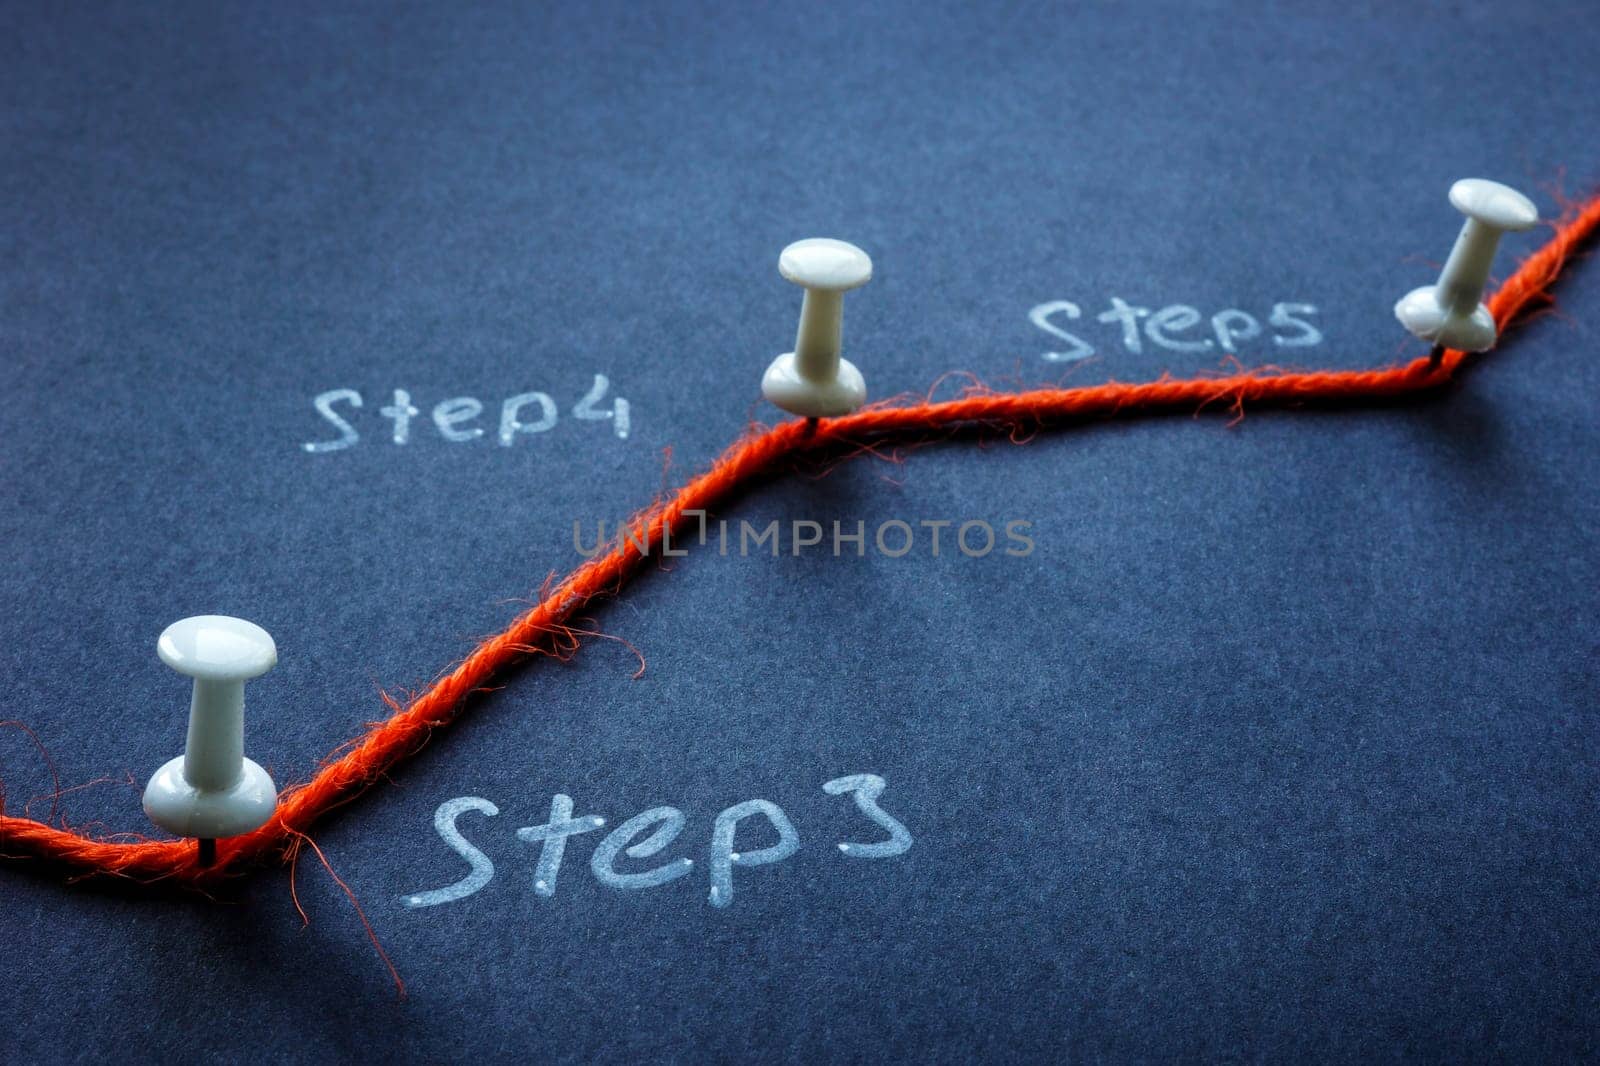 A stretched thread with pins indicating stages of task or process.